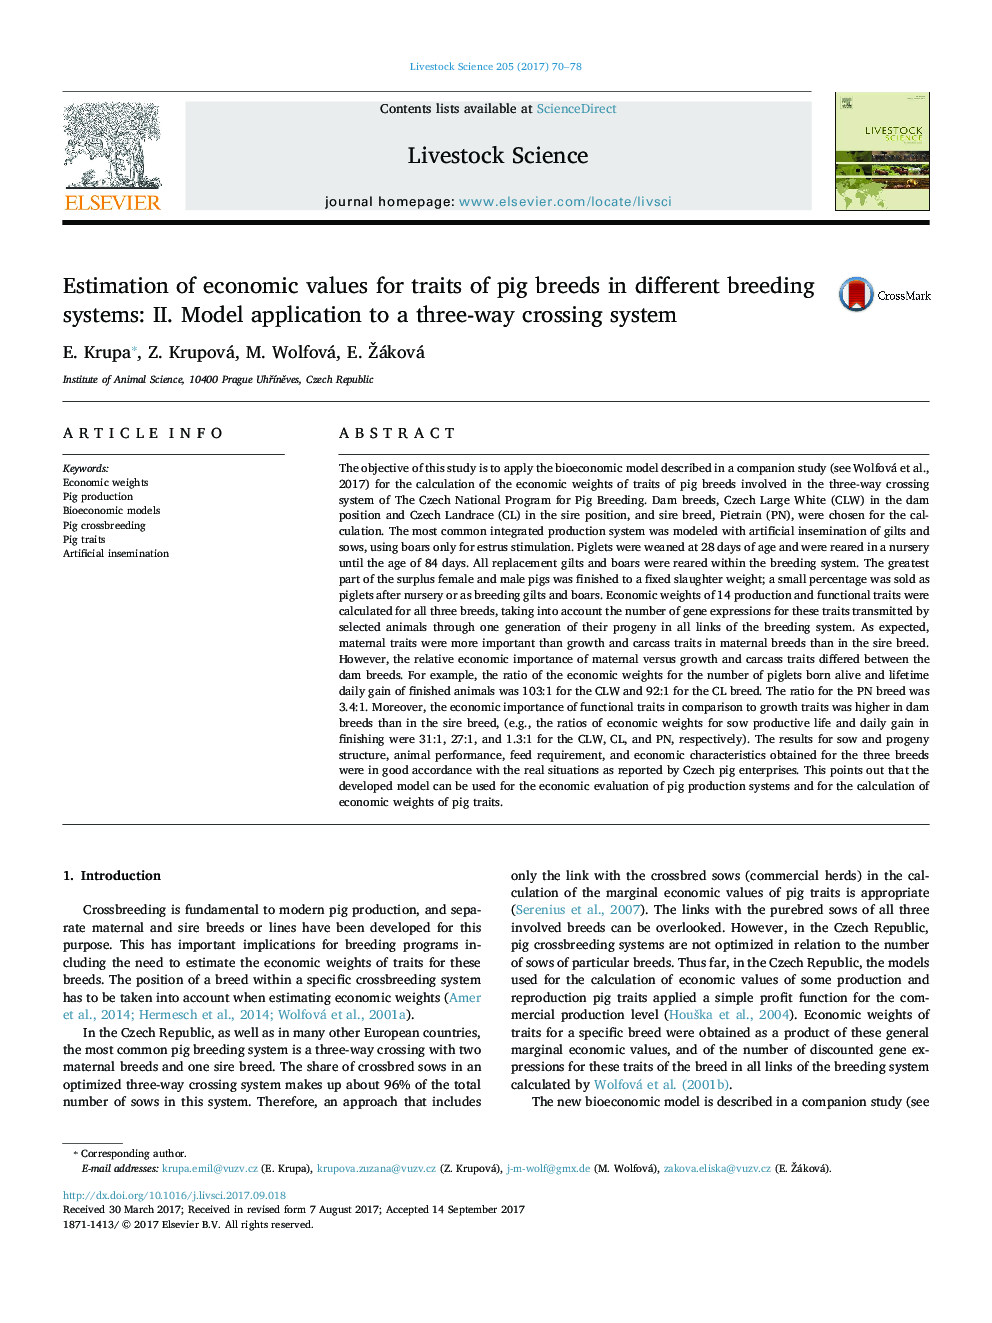 Estimation of economic values for traits of pig breeds in different breeding systems: II. Model application to a three-way crossing system